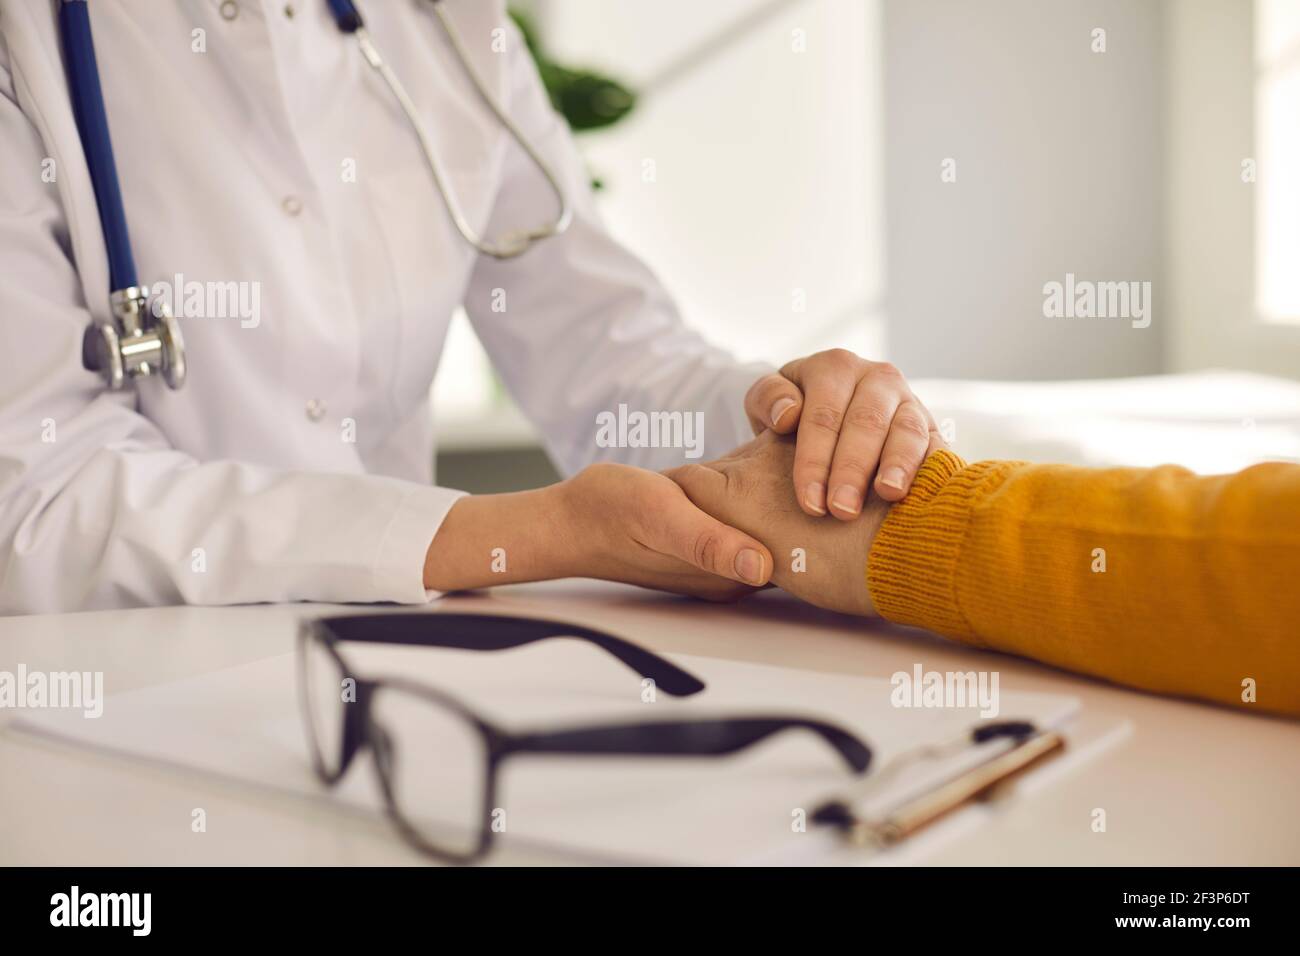 Closeup female doctor hold male patient hand give medical help support reassure Stock Photo